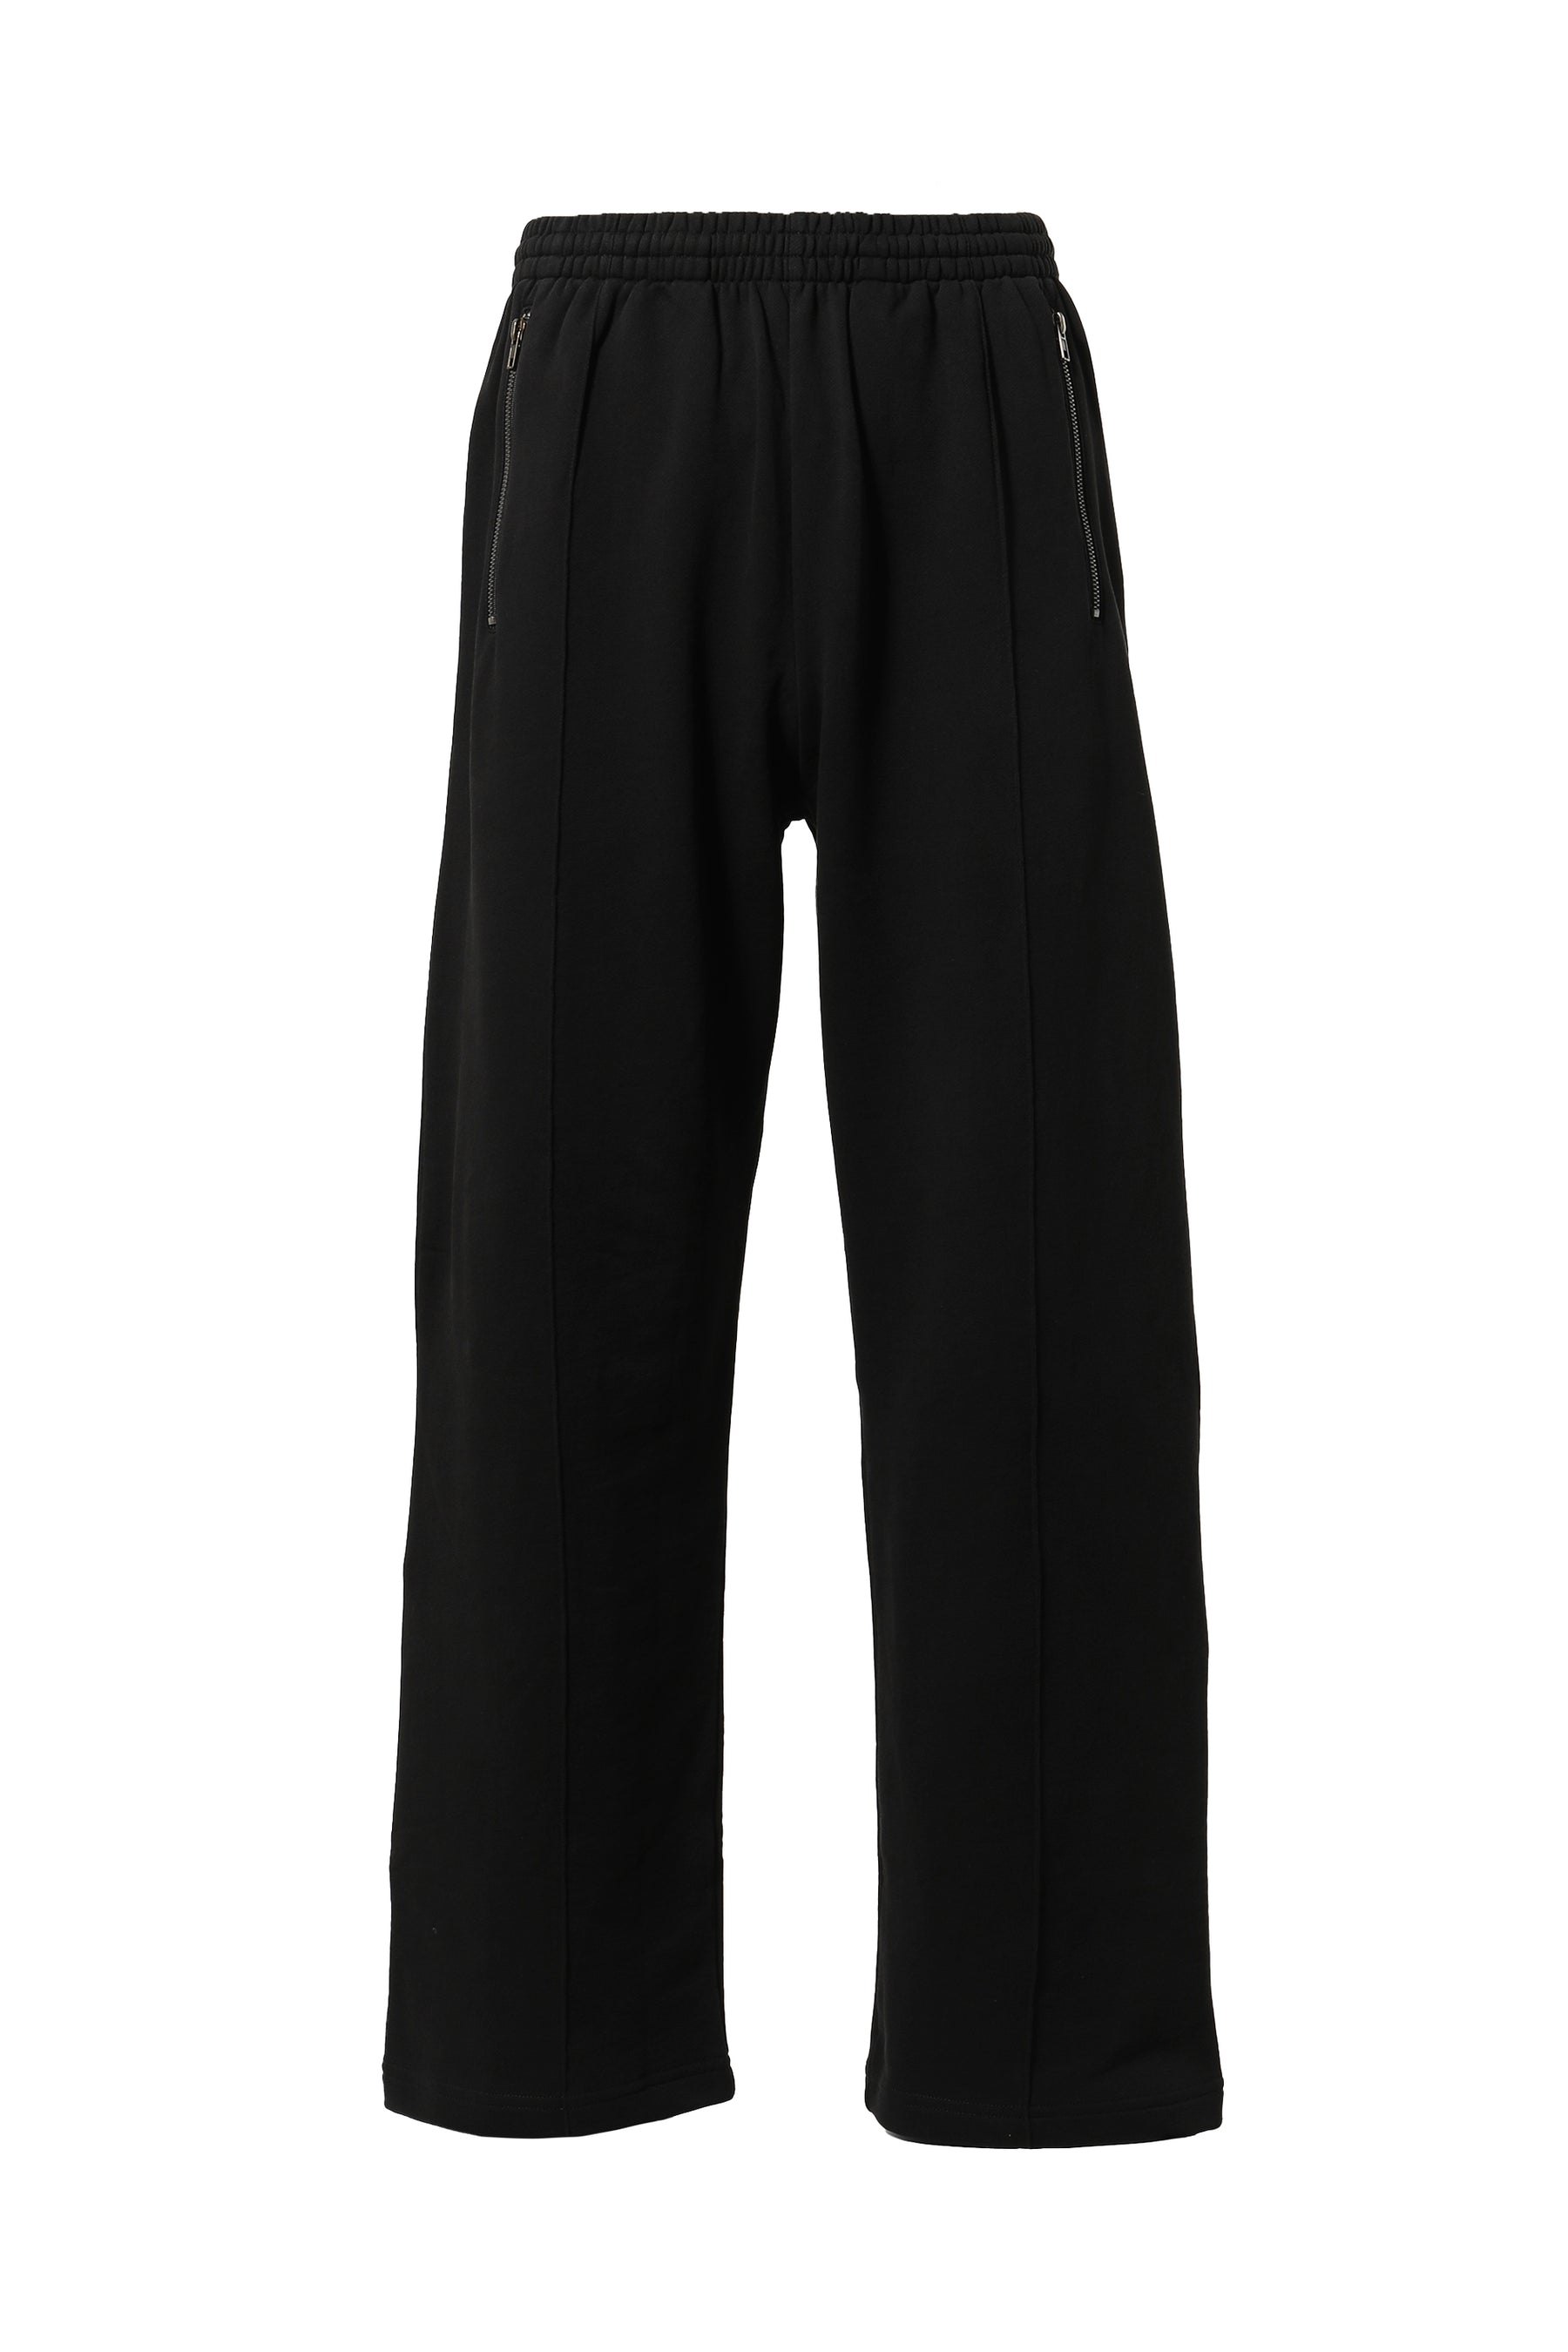 WILLY CHAVARRIA FW23 PINTUCK SWEAT PANTS / SOLID BLK -NUBIAN